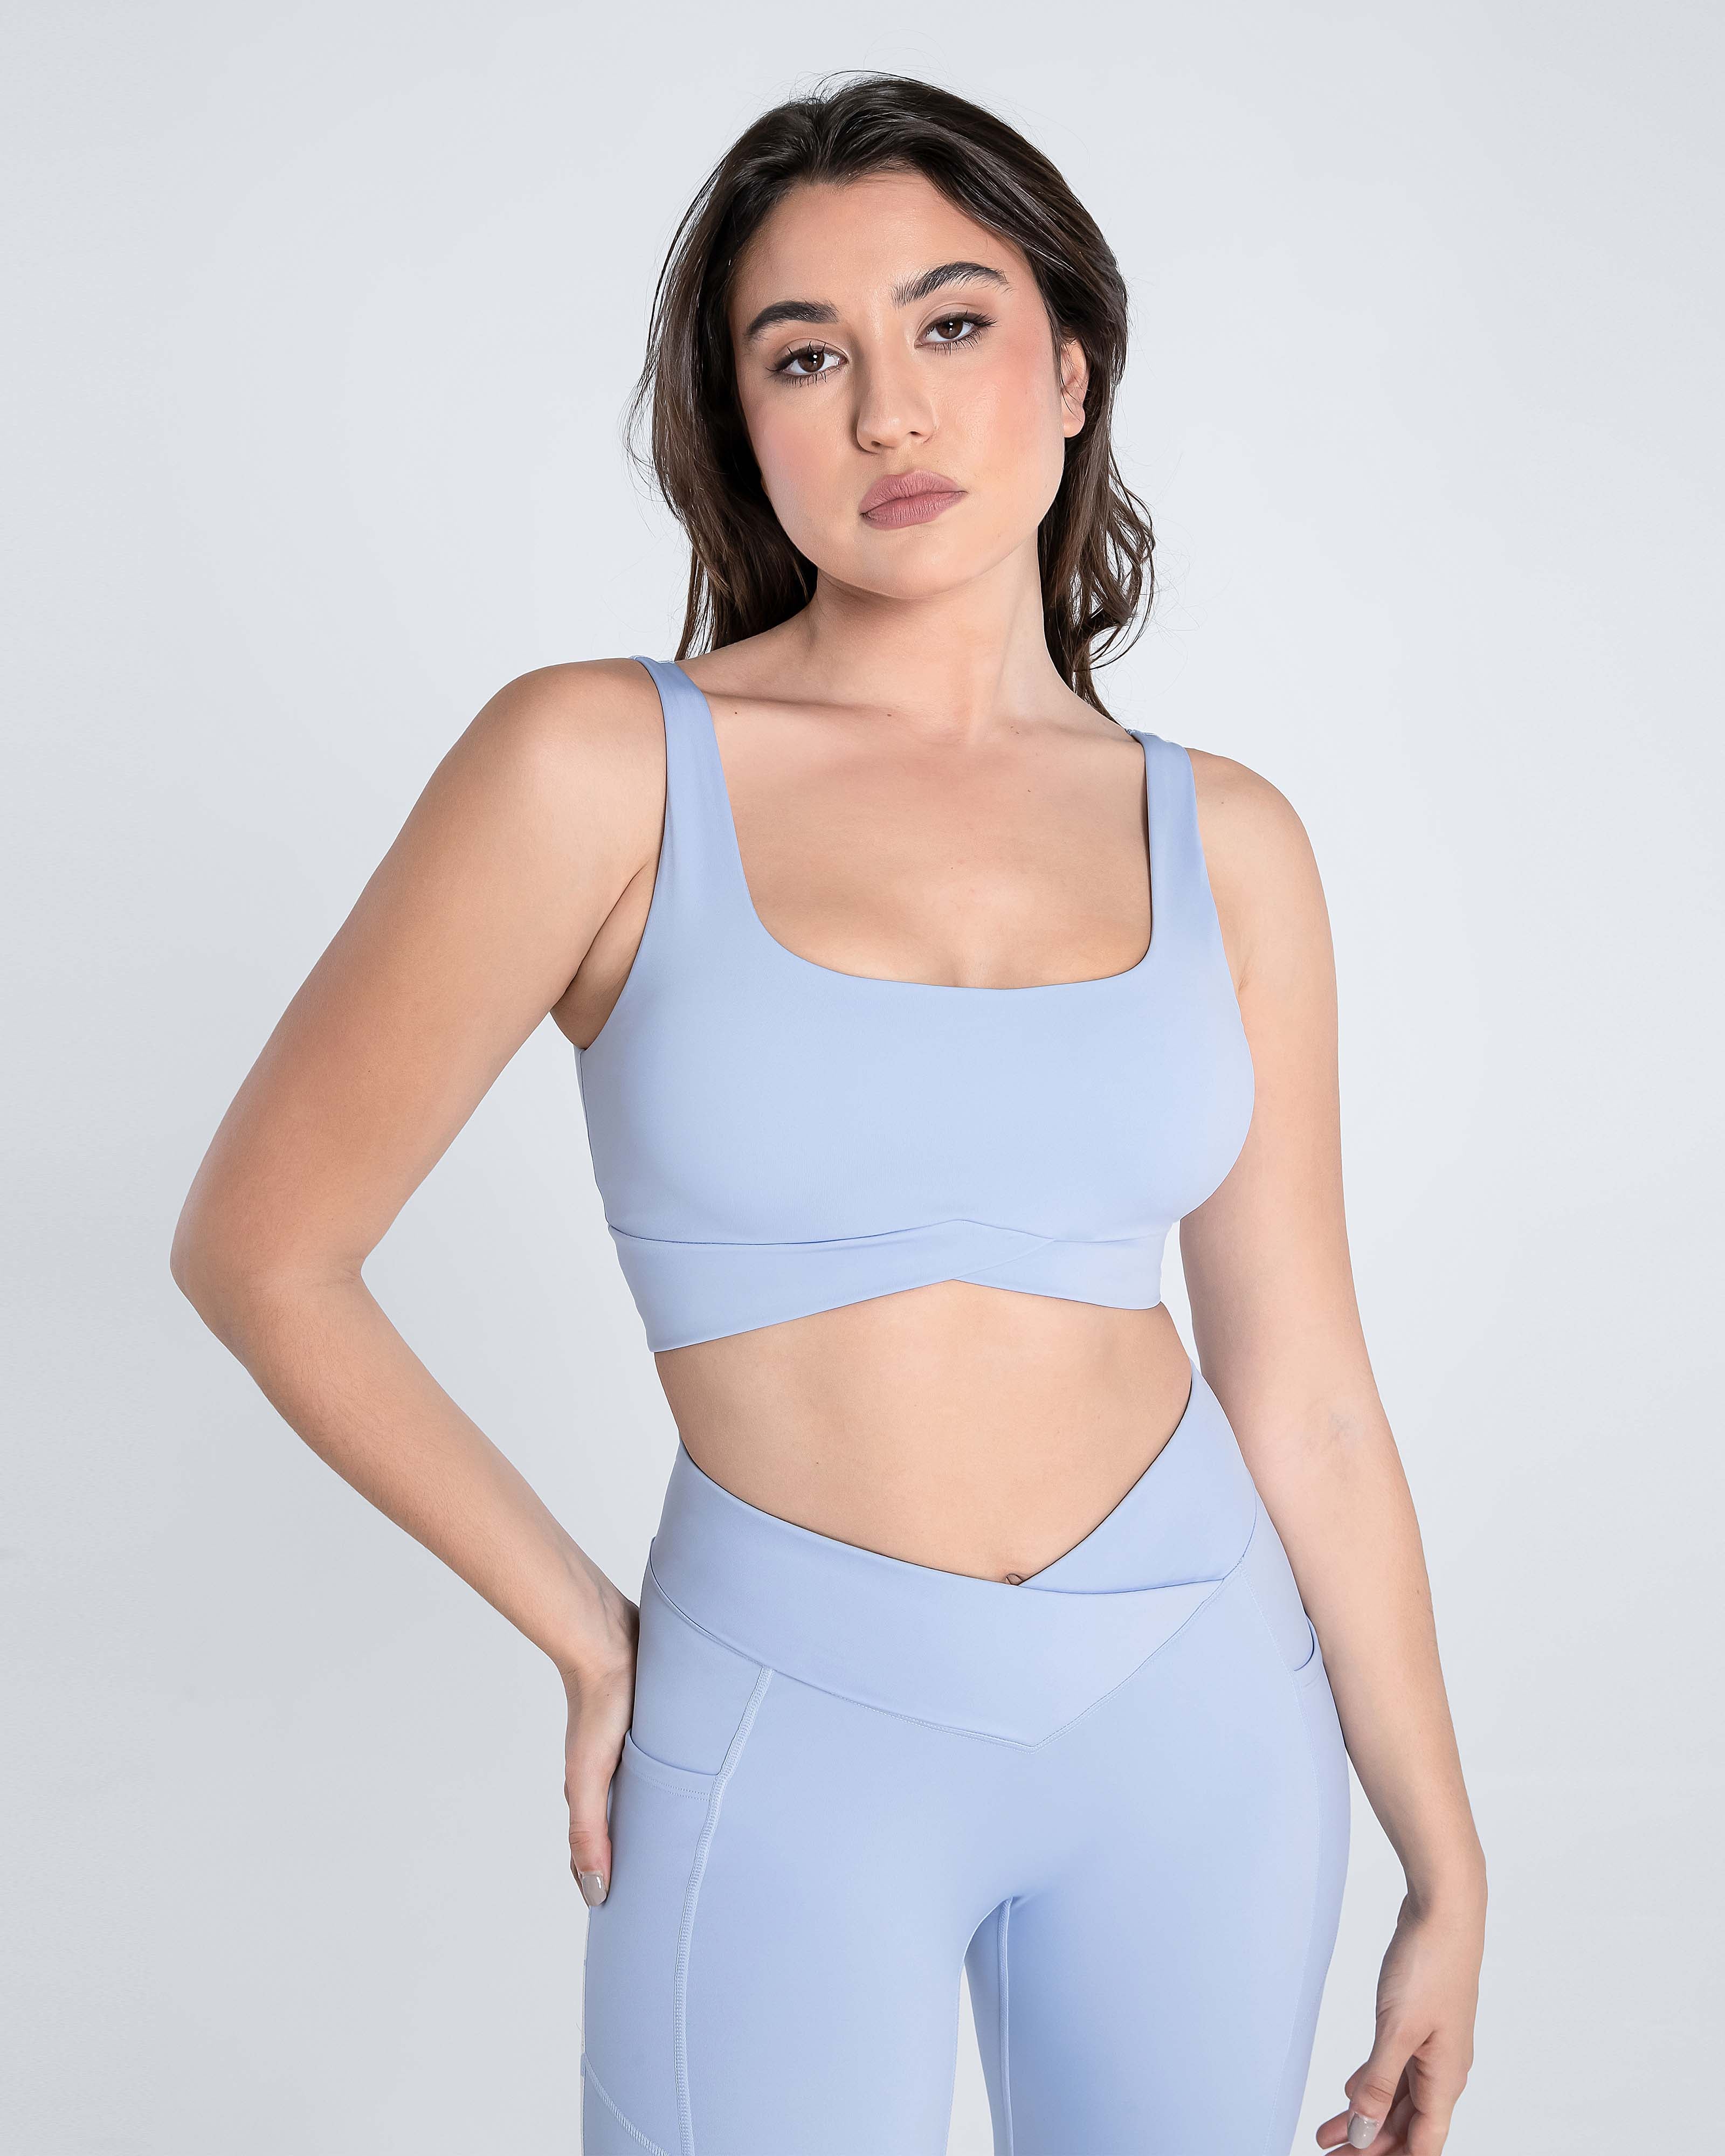 Womens Active Fitness Top With Falsies, Yoga Bra Pad, And Long Sleeves For  Workout, Training, Gym, Yoga, Running, Hiking Size 13 From Hollywany,  $17.66